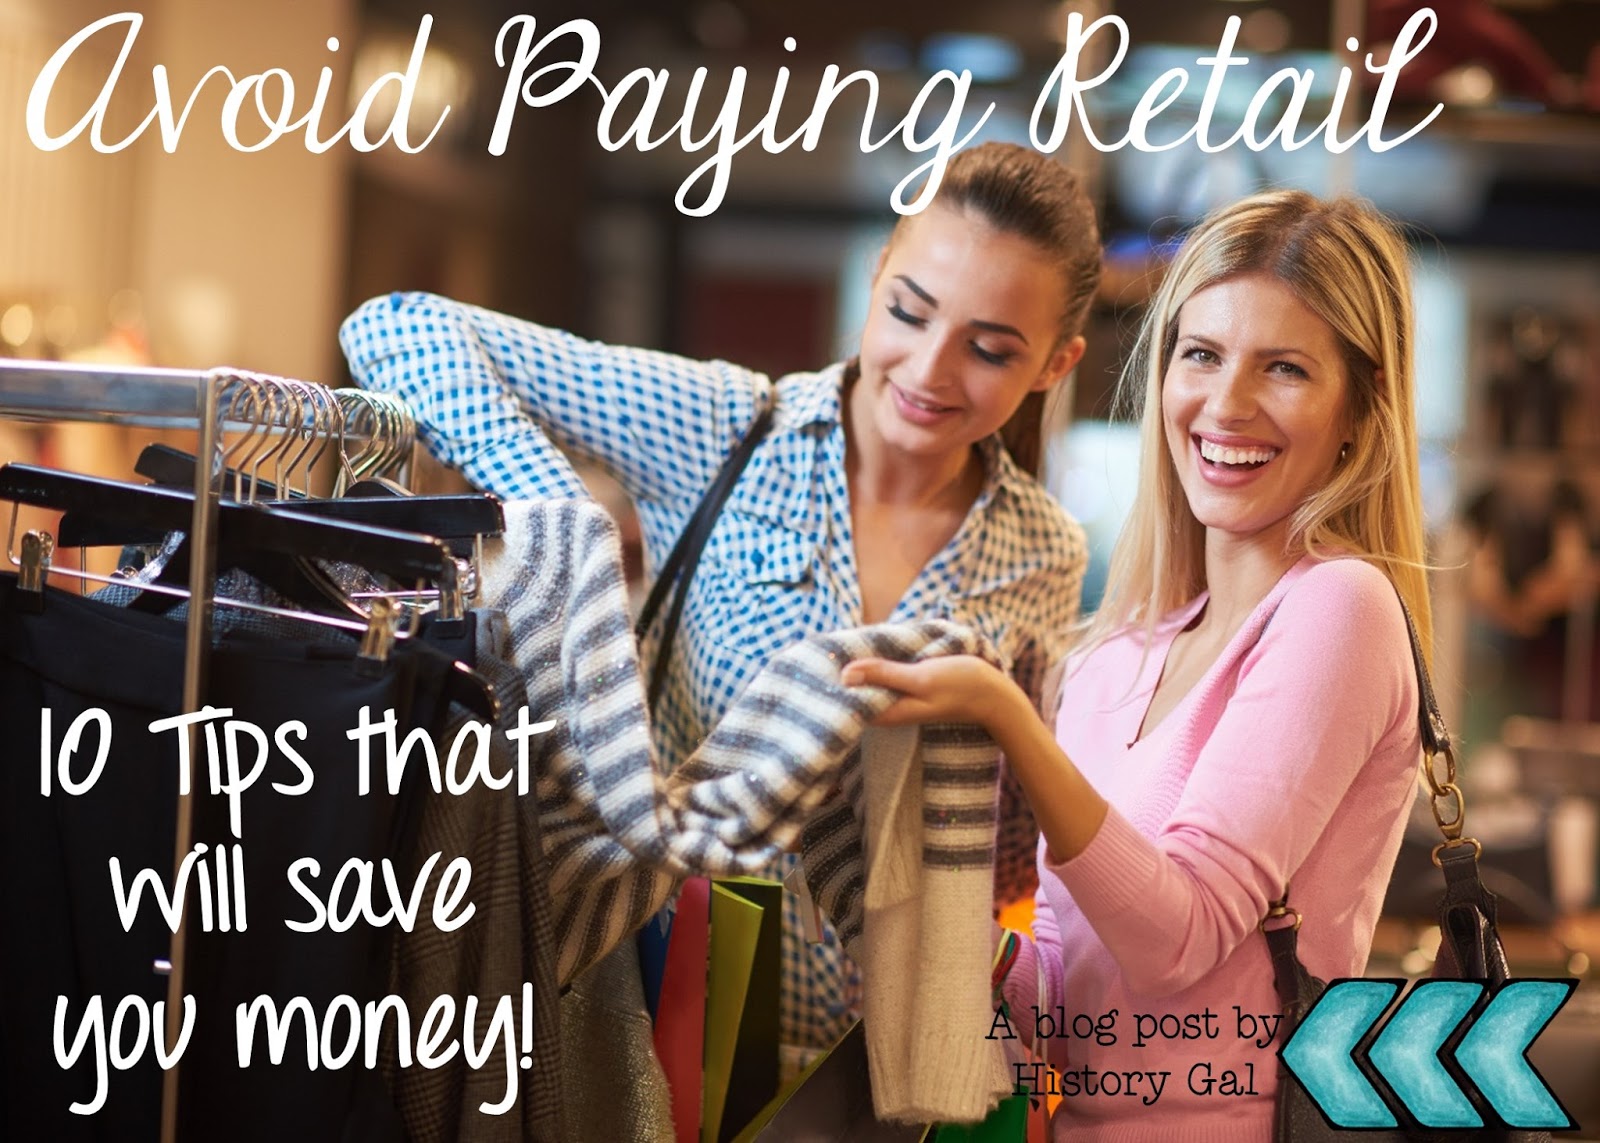 10 Tips to Avoid Paying Retail By History Gal